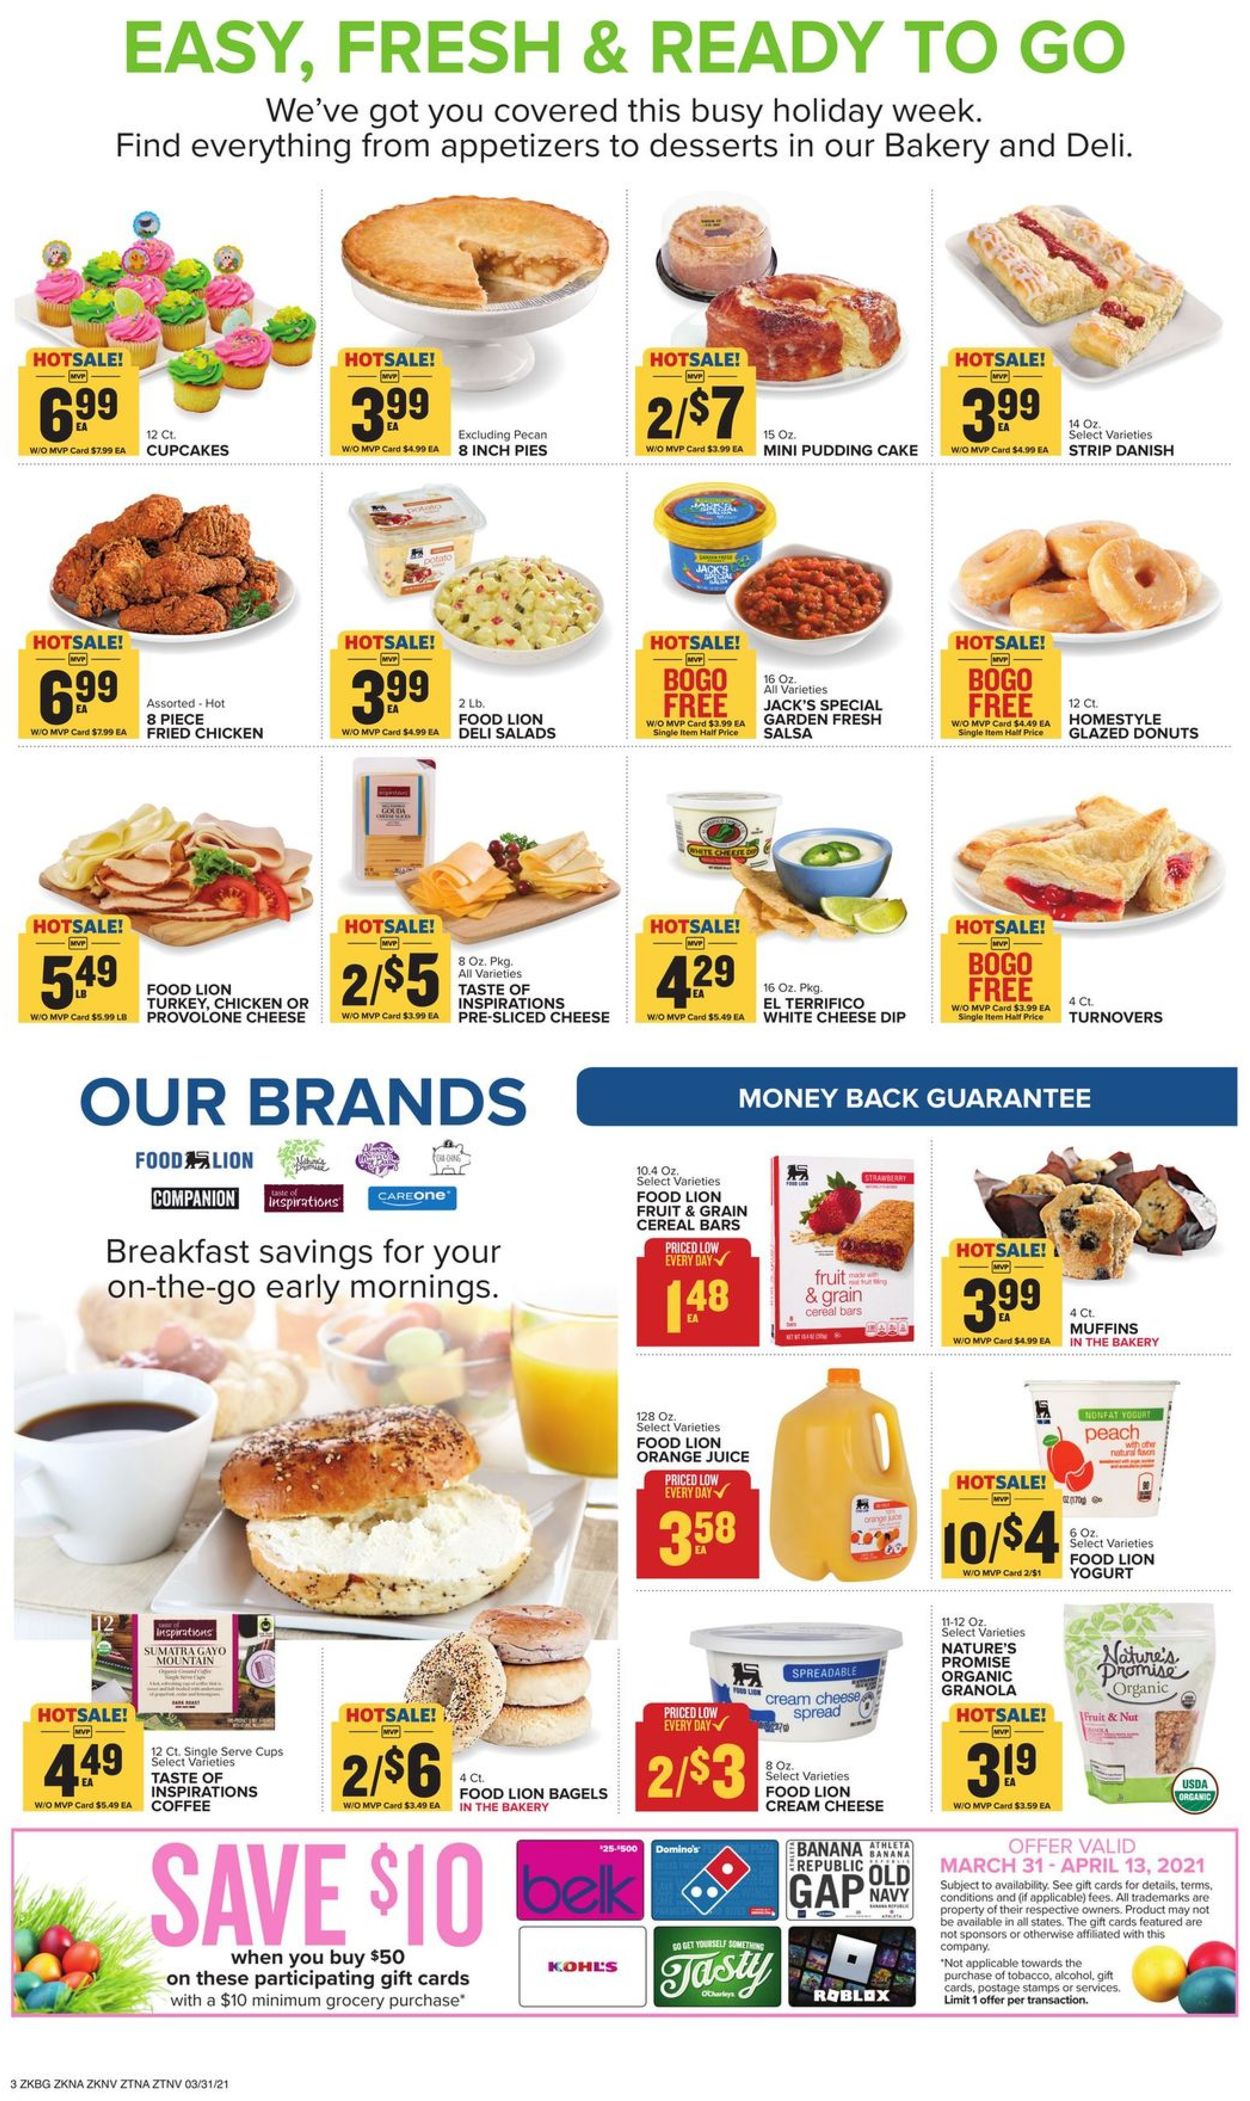 Food Lion Easter 2021 ad Current weekly ad 03/31 04/06/2021 [4